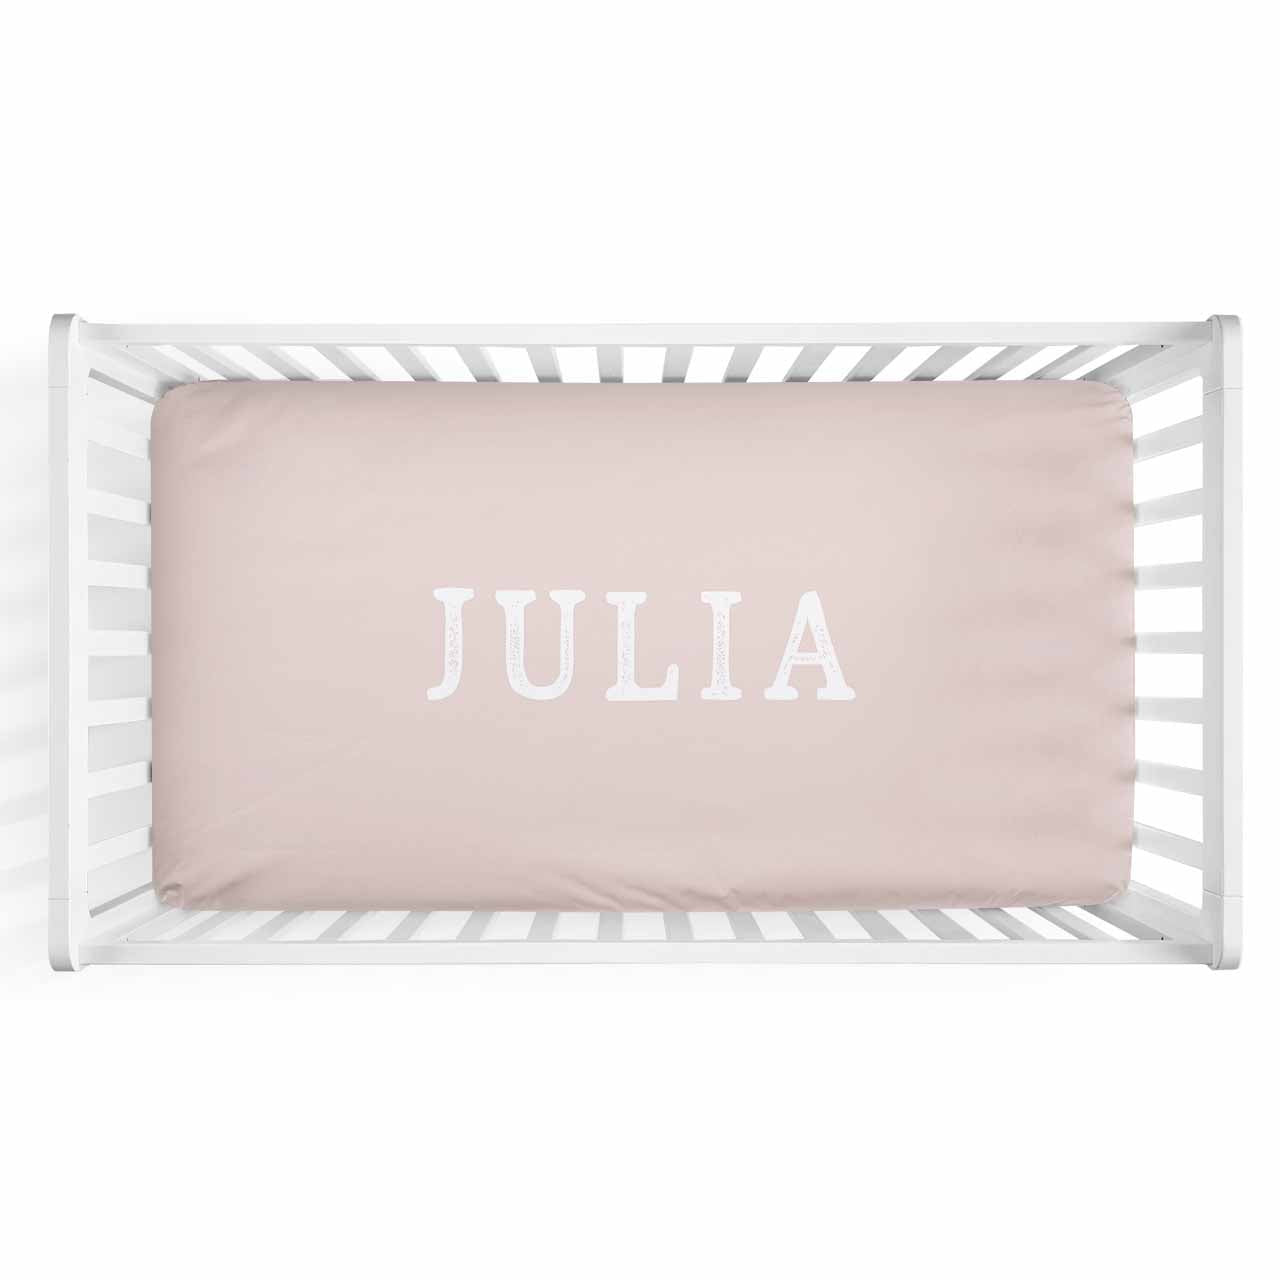 Personalized Baby Name Blush Color Jersey Knit Crib Sheet in Block Print Style